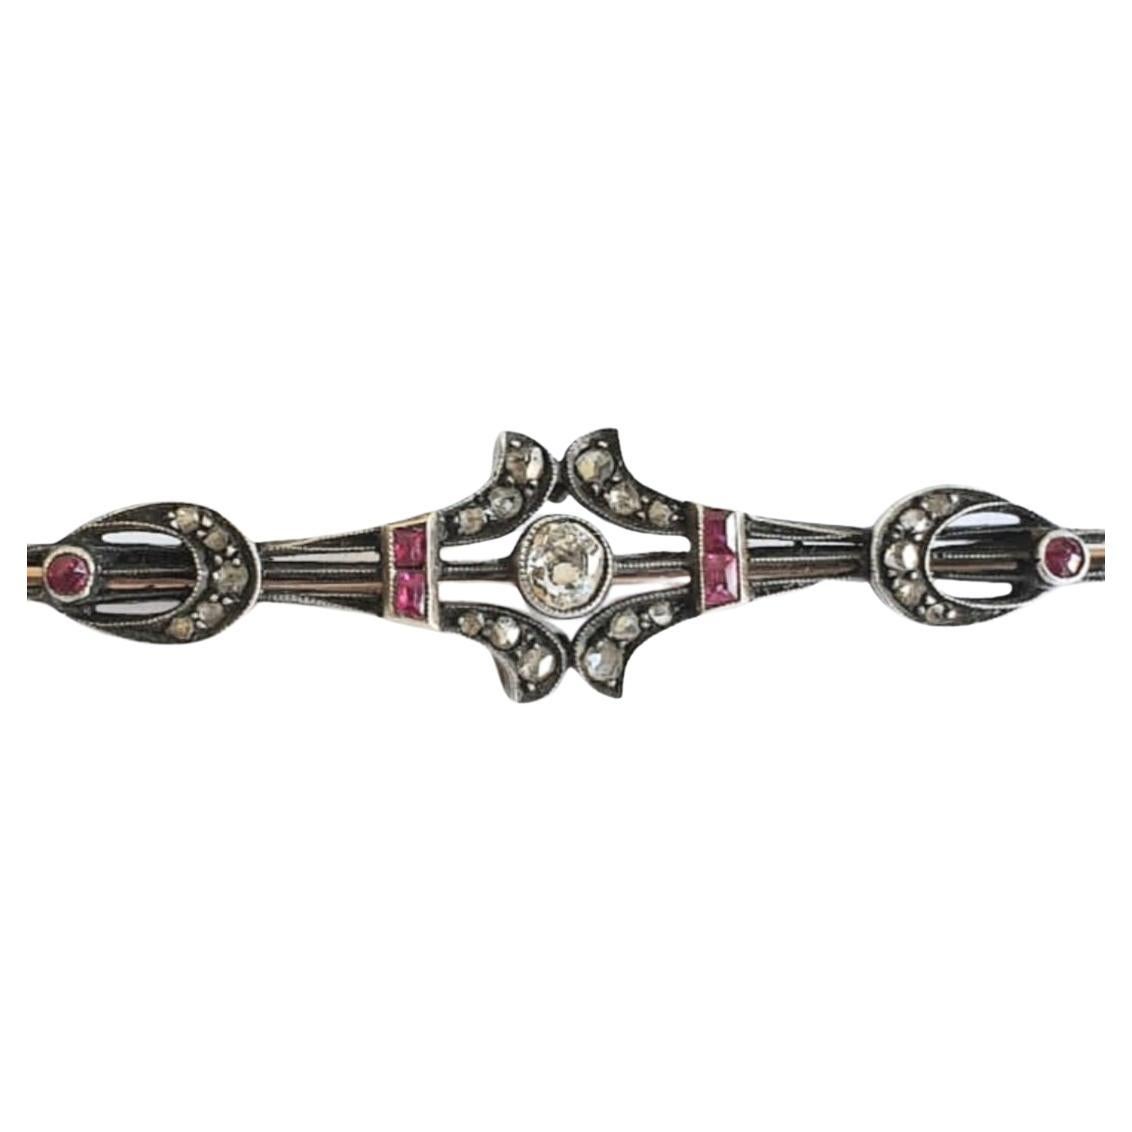 Antique russian large brooch in 14k gold topped with silver with old mine cut diamonds estimate weight of 0.50 carats and natural rubies total brooch lenght 9cm was made in moscow during the imperial russian era 1907.c hall marked 56 imperial